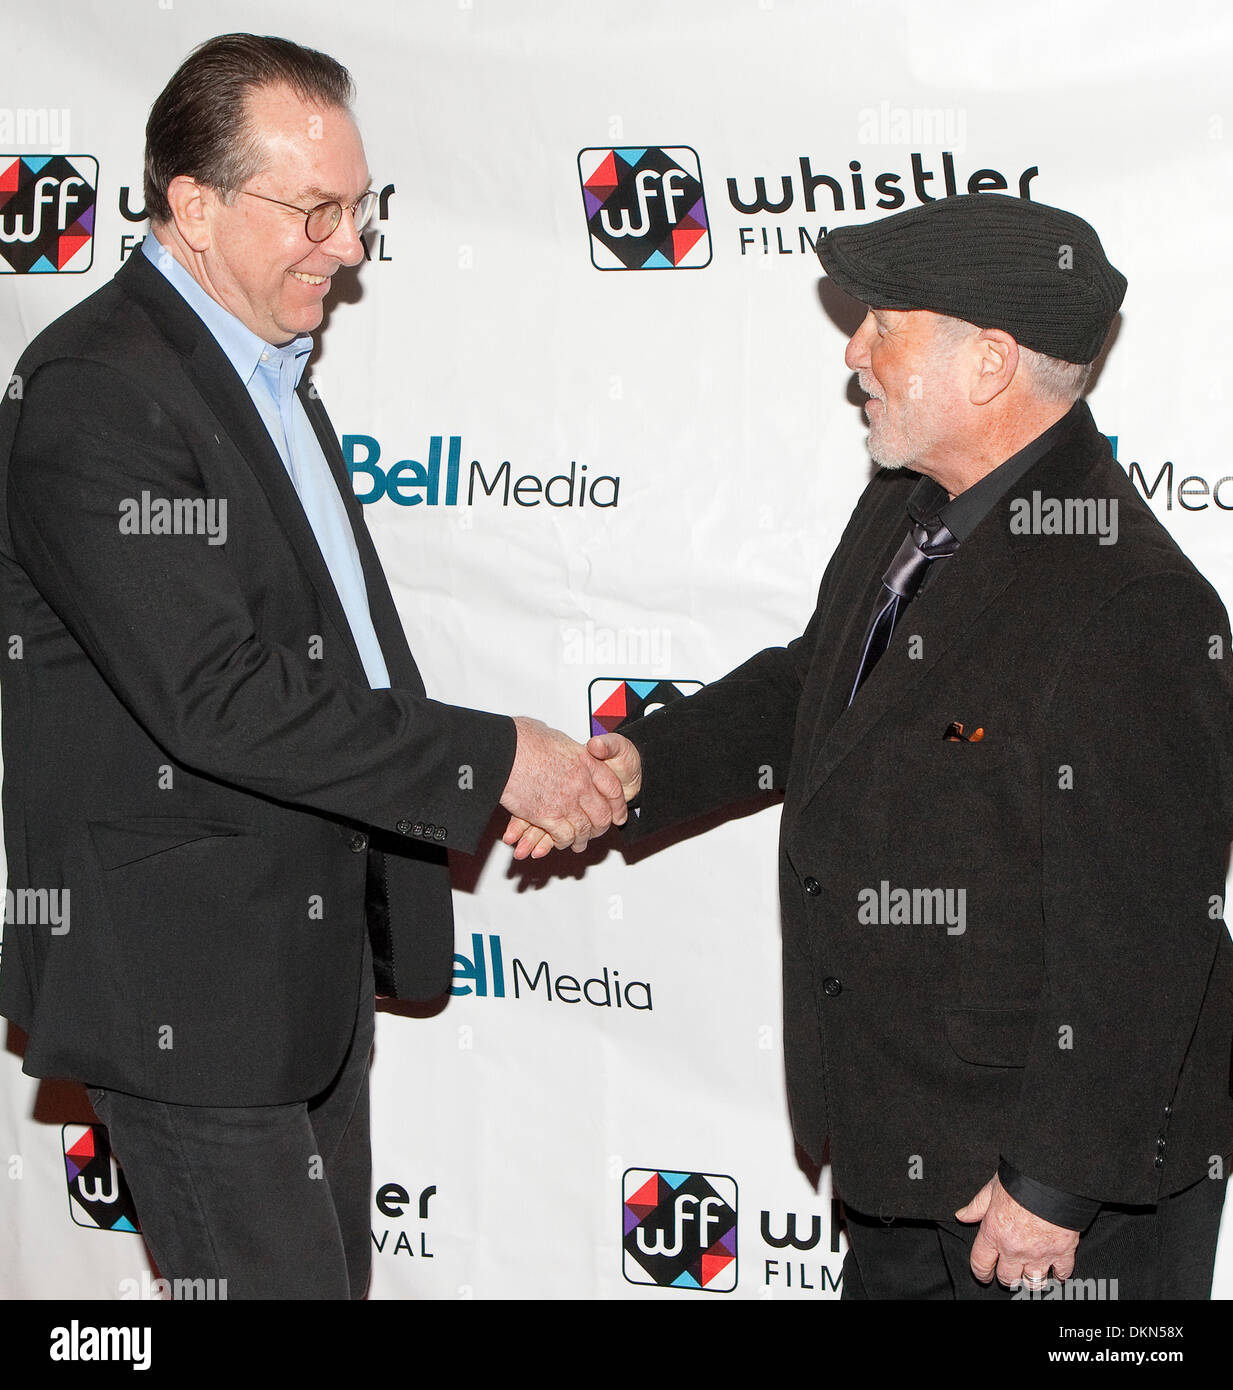 Whistler, British Columbia, Canada. 7th Dec, 2013. Variety's VP & Executive Editor STEVEN GAYDOS (L) welcomes RICHARD DREYFUSS after he arrives on the red carpet for his onstage Tribute interview by Gaydos during the Whistler Film Festival WFF 2013. © Heinz Ruckemann/ZUMA Wire/ZUMAPRESS.com/Alamy Live News Stock Photo